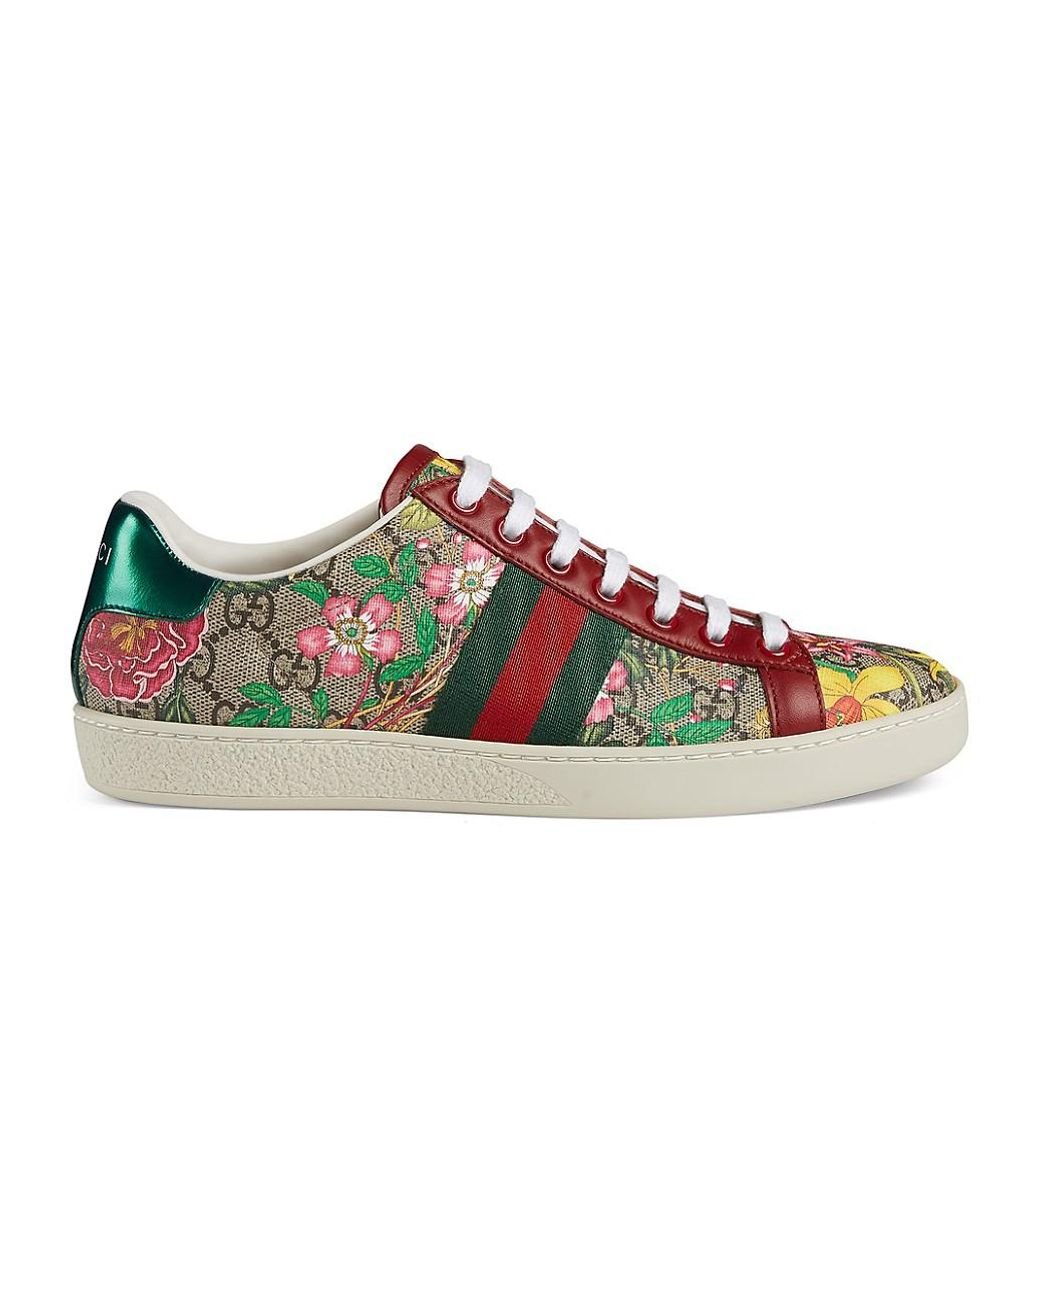 GUCCI Calfskin Web Floral Embroidered Womens Ace Sneakers 35.5